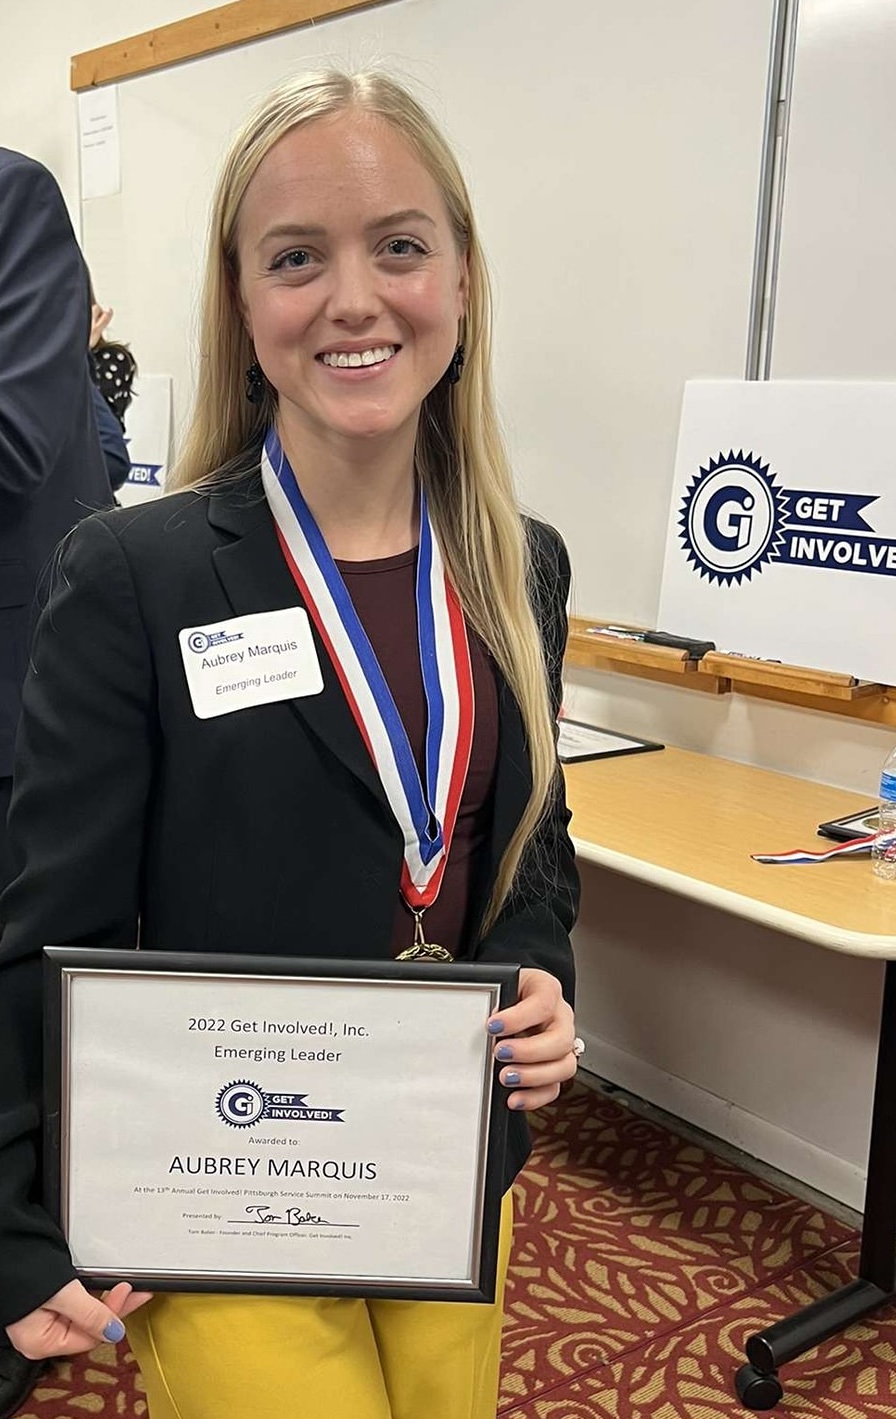 Aubrey Marquis with her 2022 Emerging Leader Award from Get Involved!, Inc.